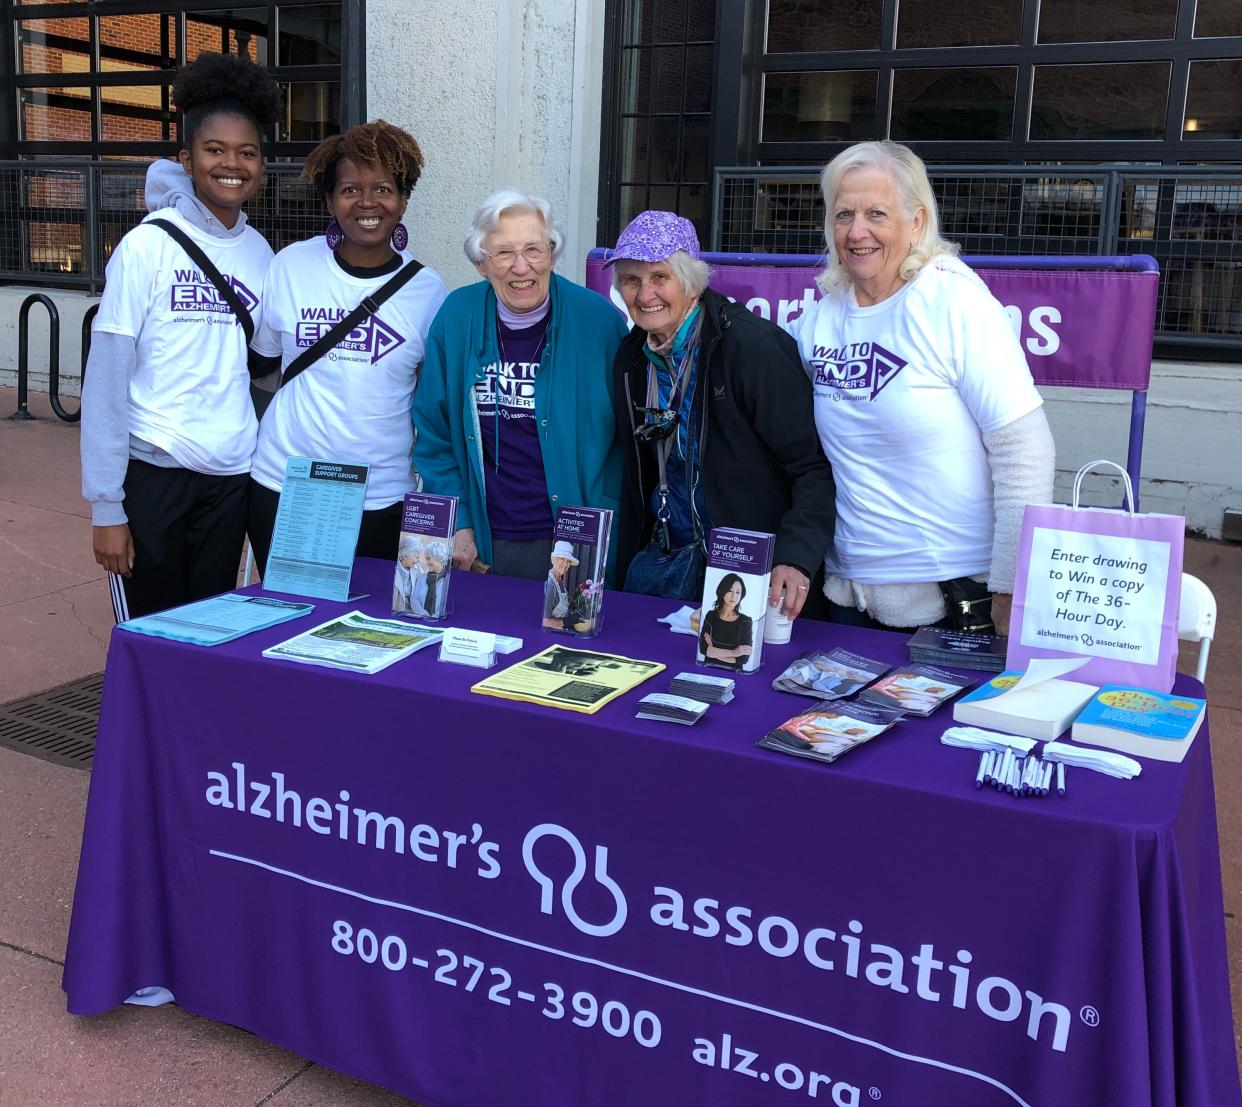 The Alzheimer’s Association Northwest Ohio Chapter is seeking volunteers to assist with community education, support groups, fundraisers, advocacy and Walks to End Alzheimer’s.